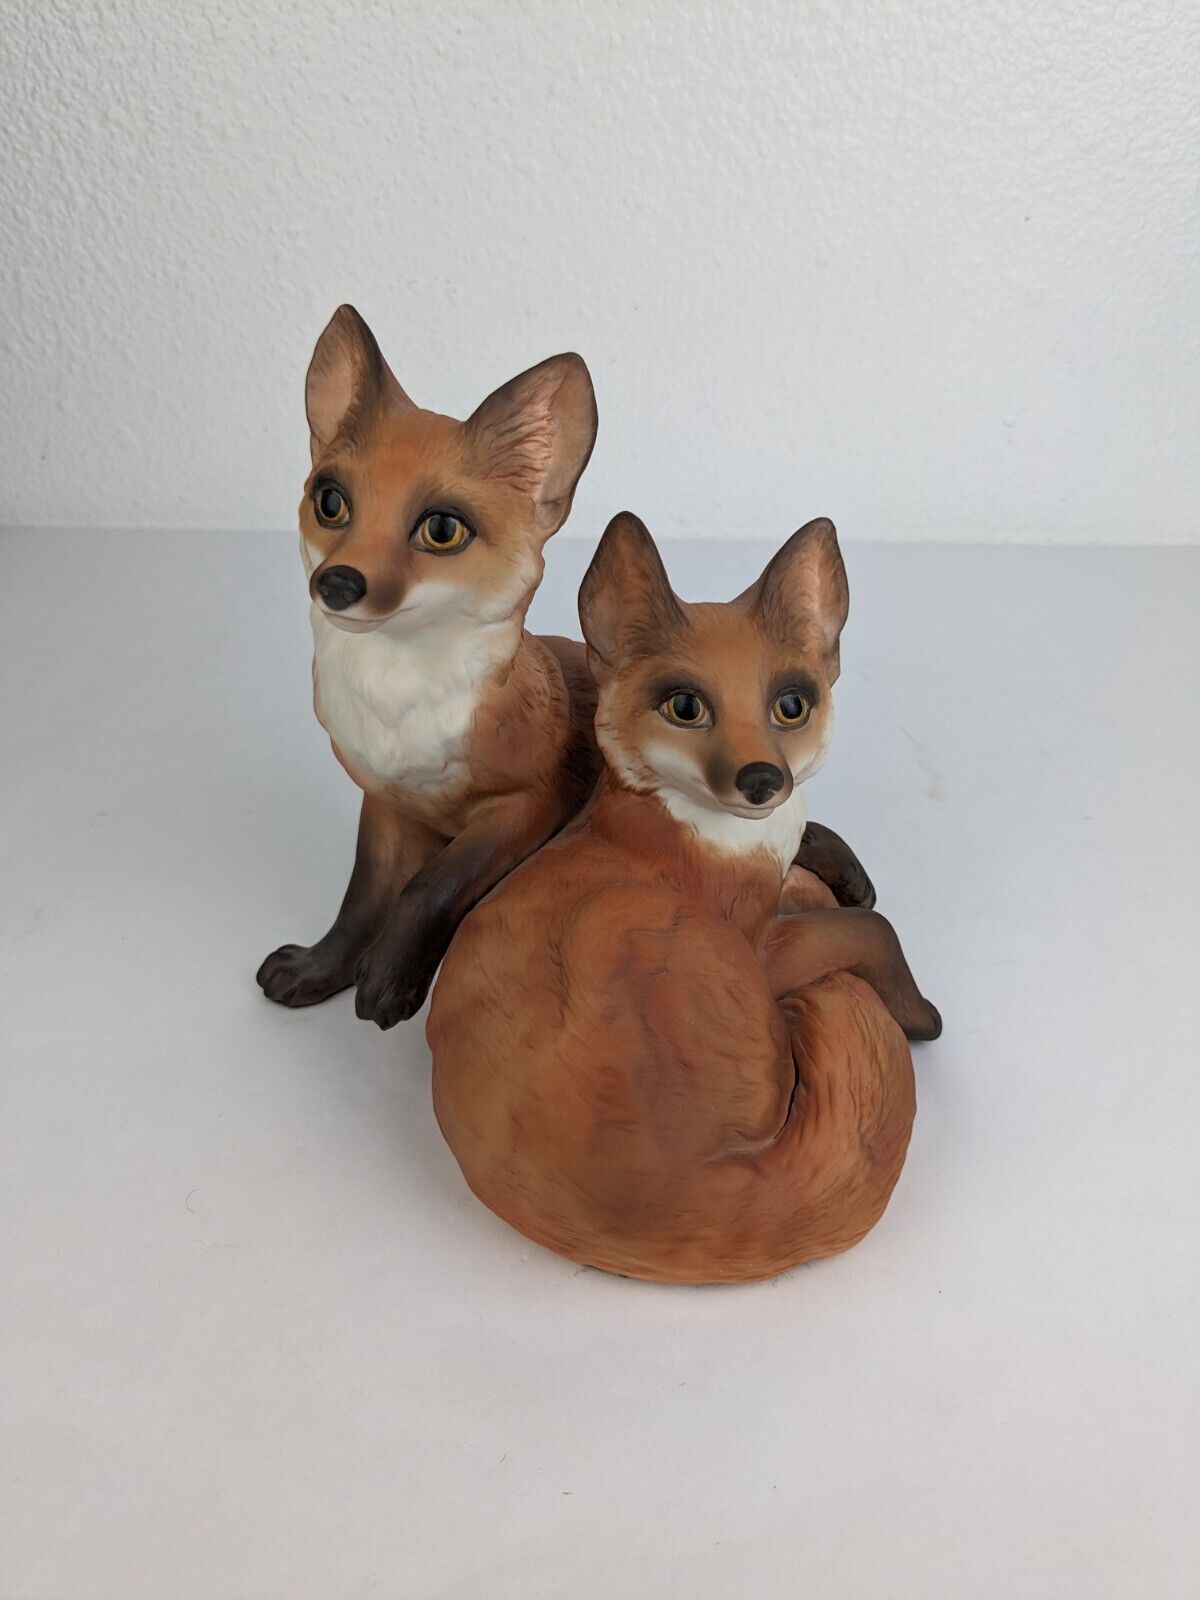 Cybis Porcelain American Red Fox Cubs Chatsworth & Sloane 1980s LE/200 Closed 93